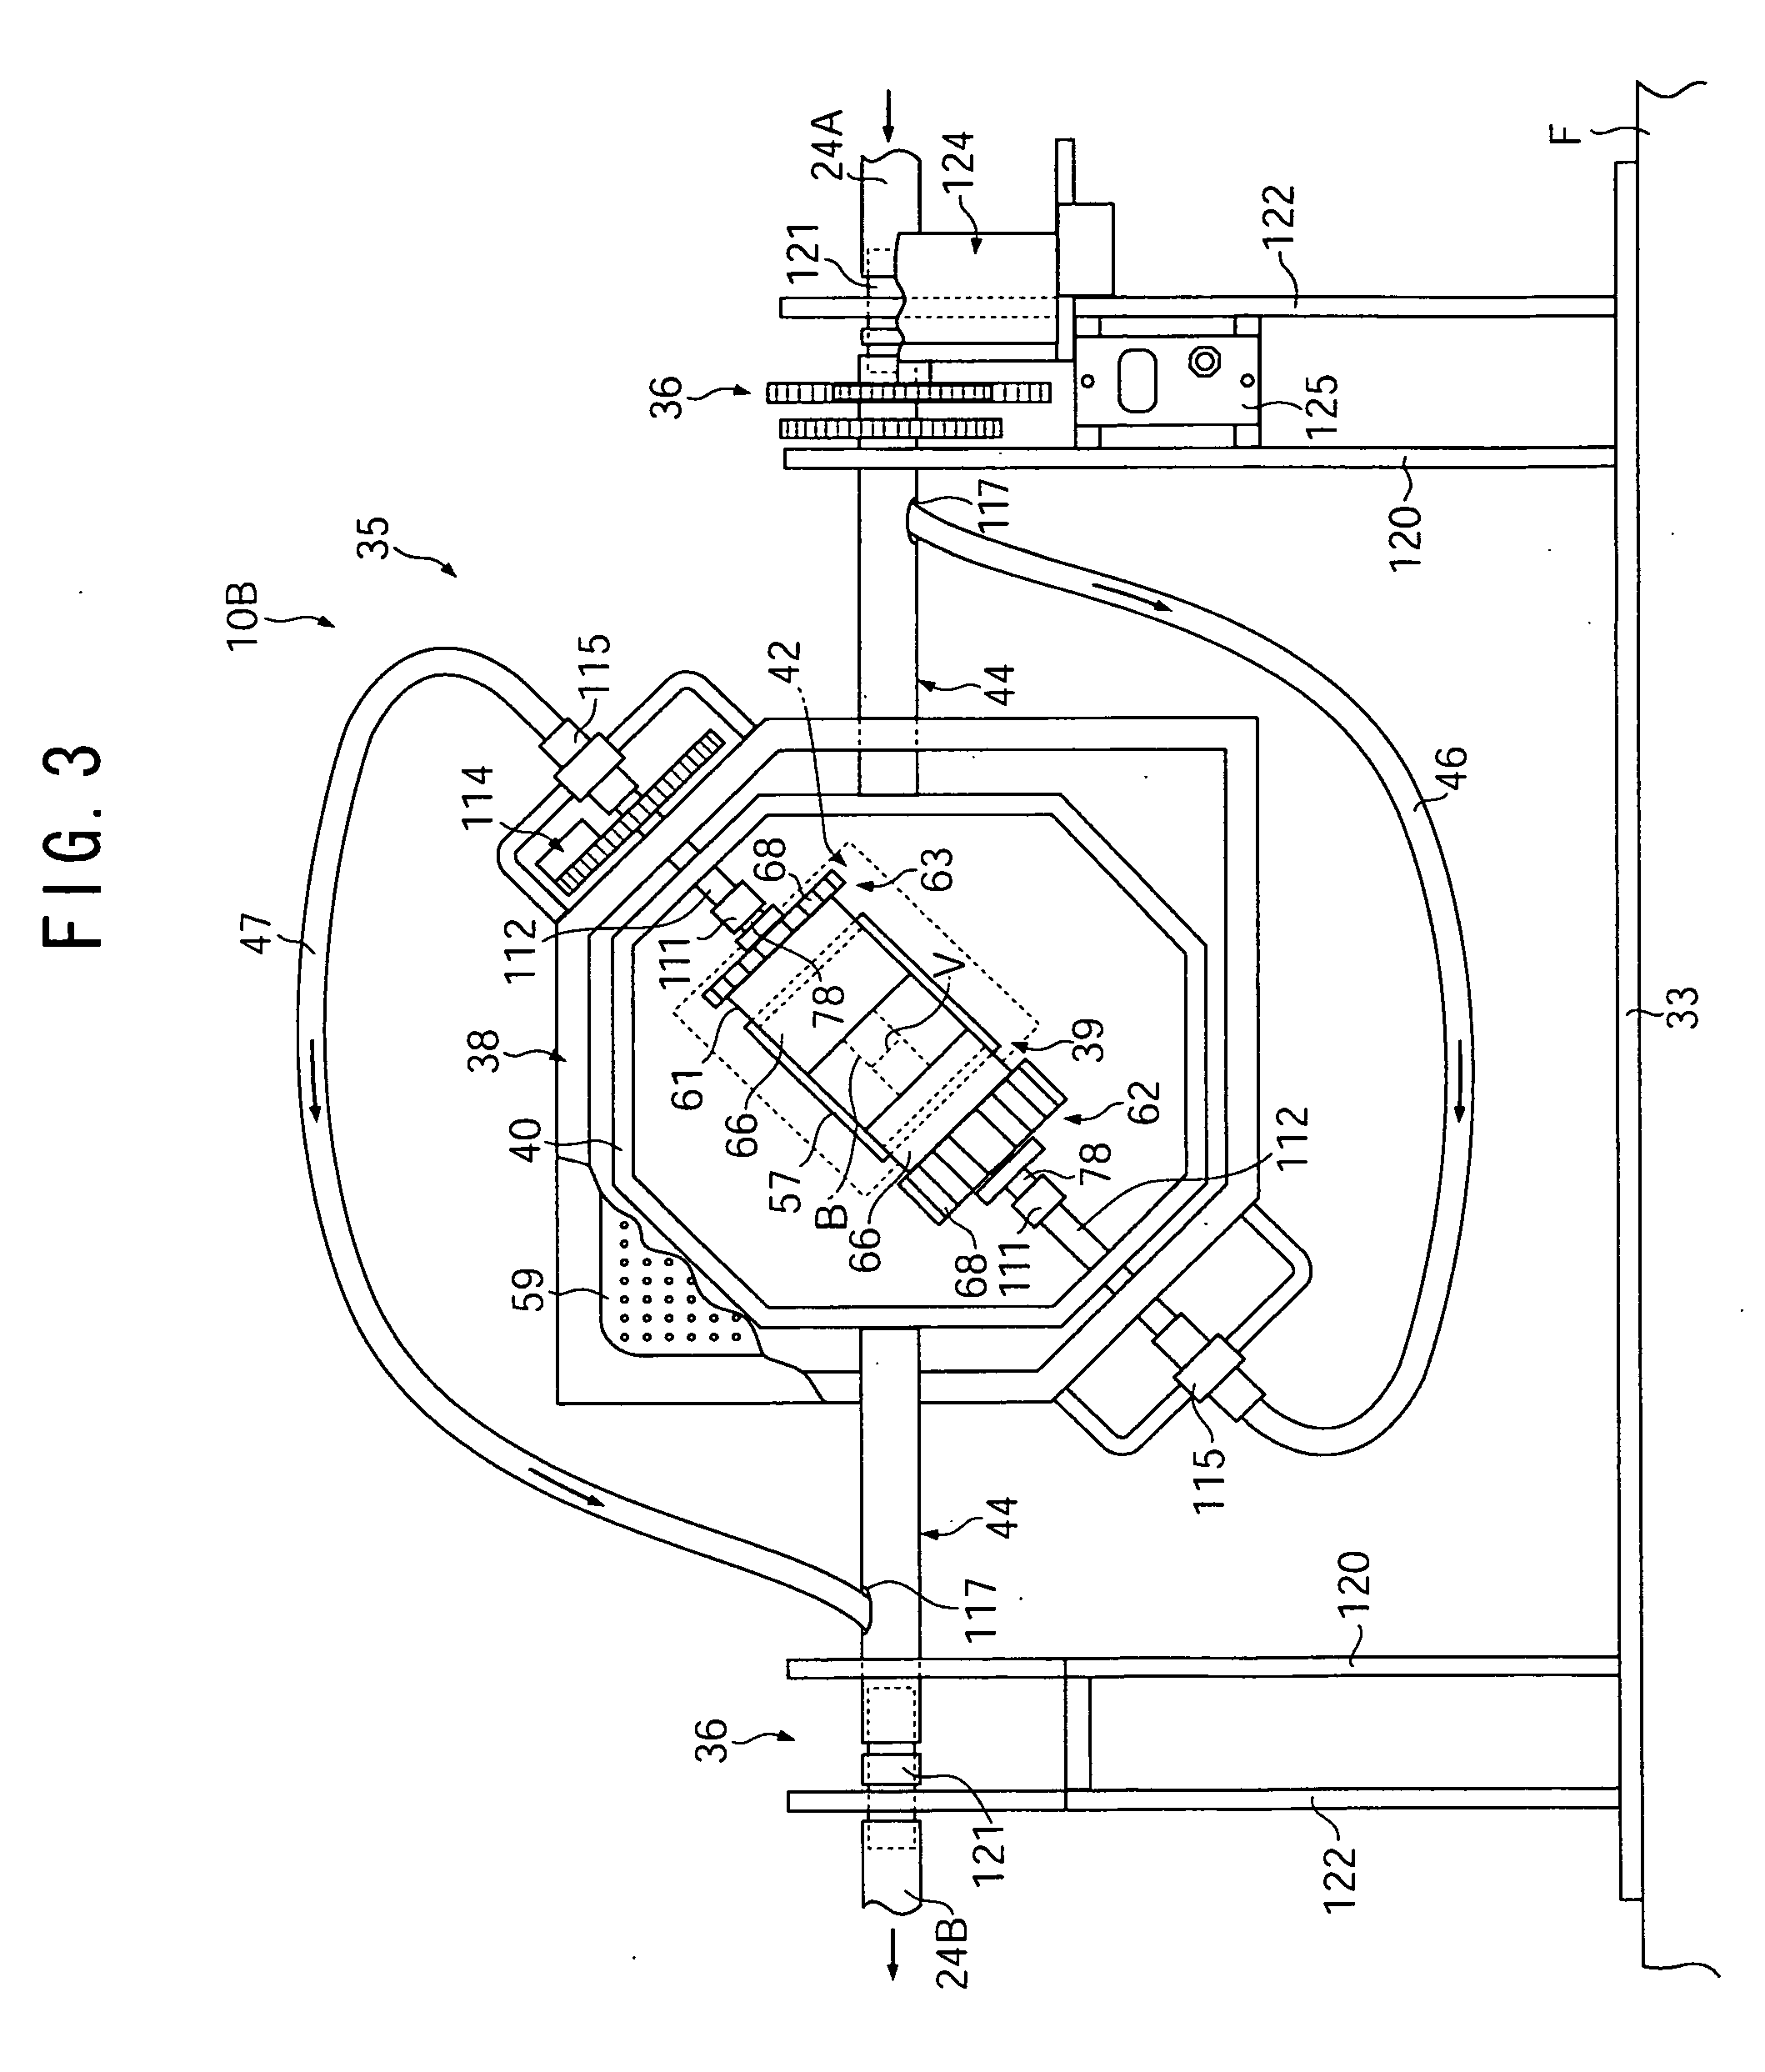 Method of removing cell